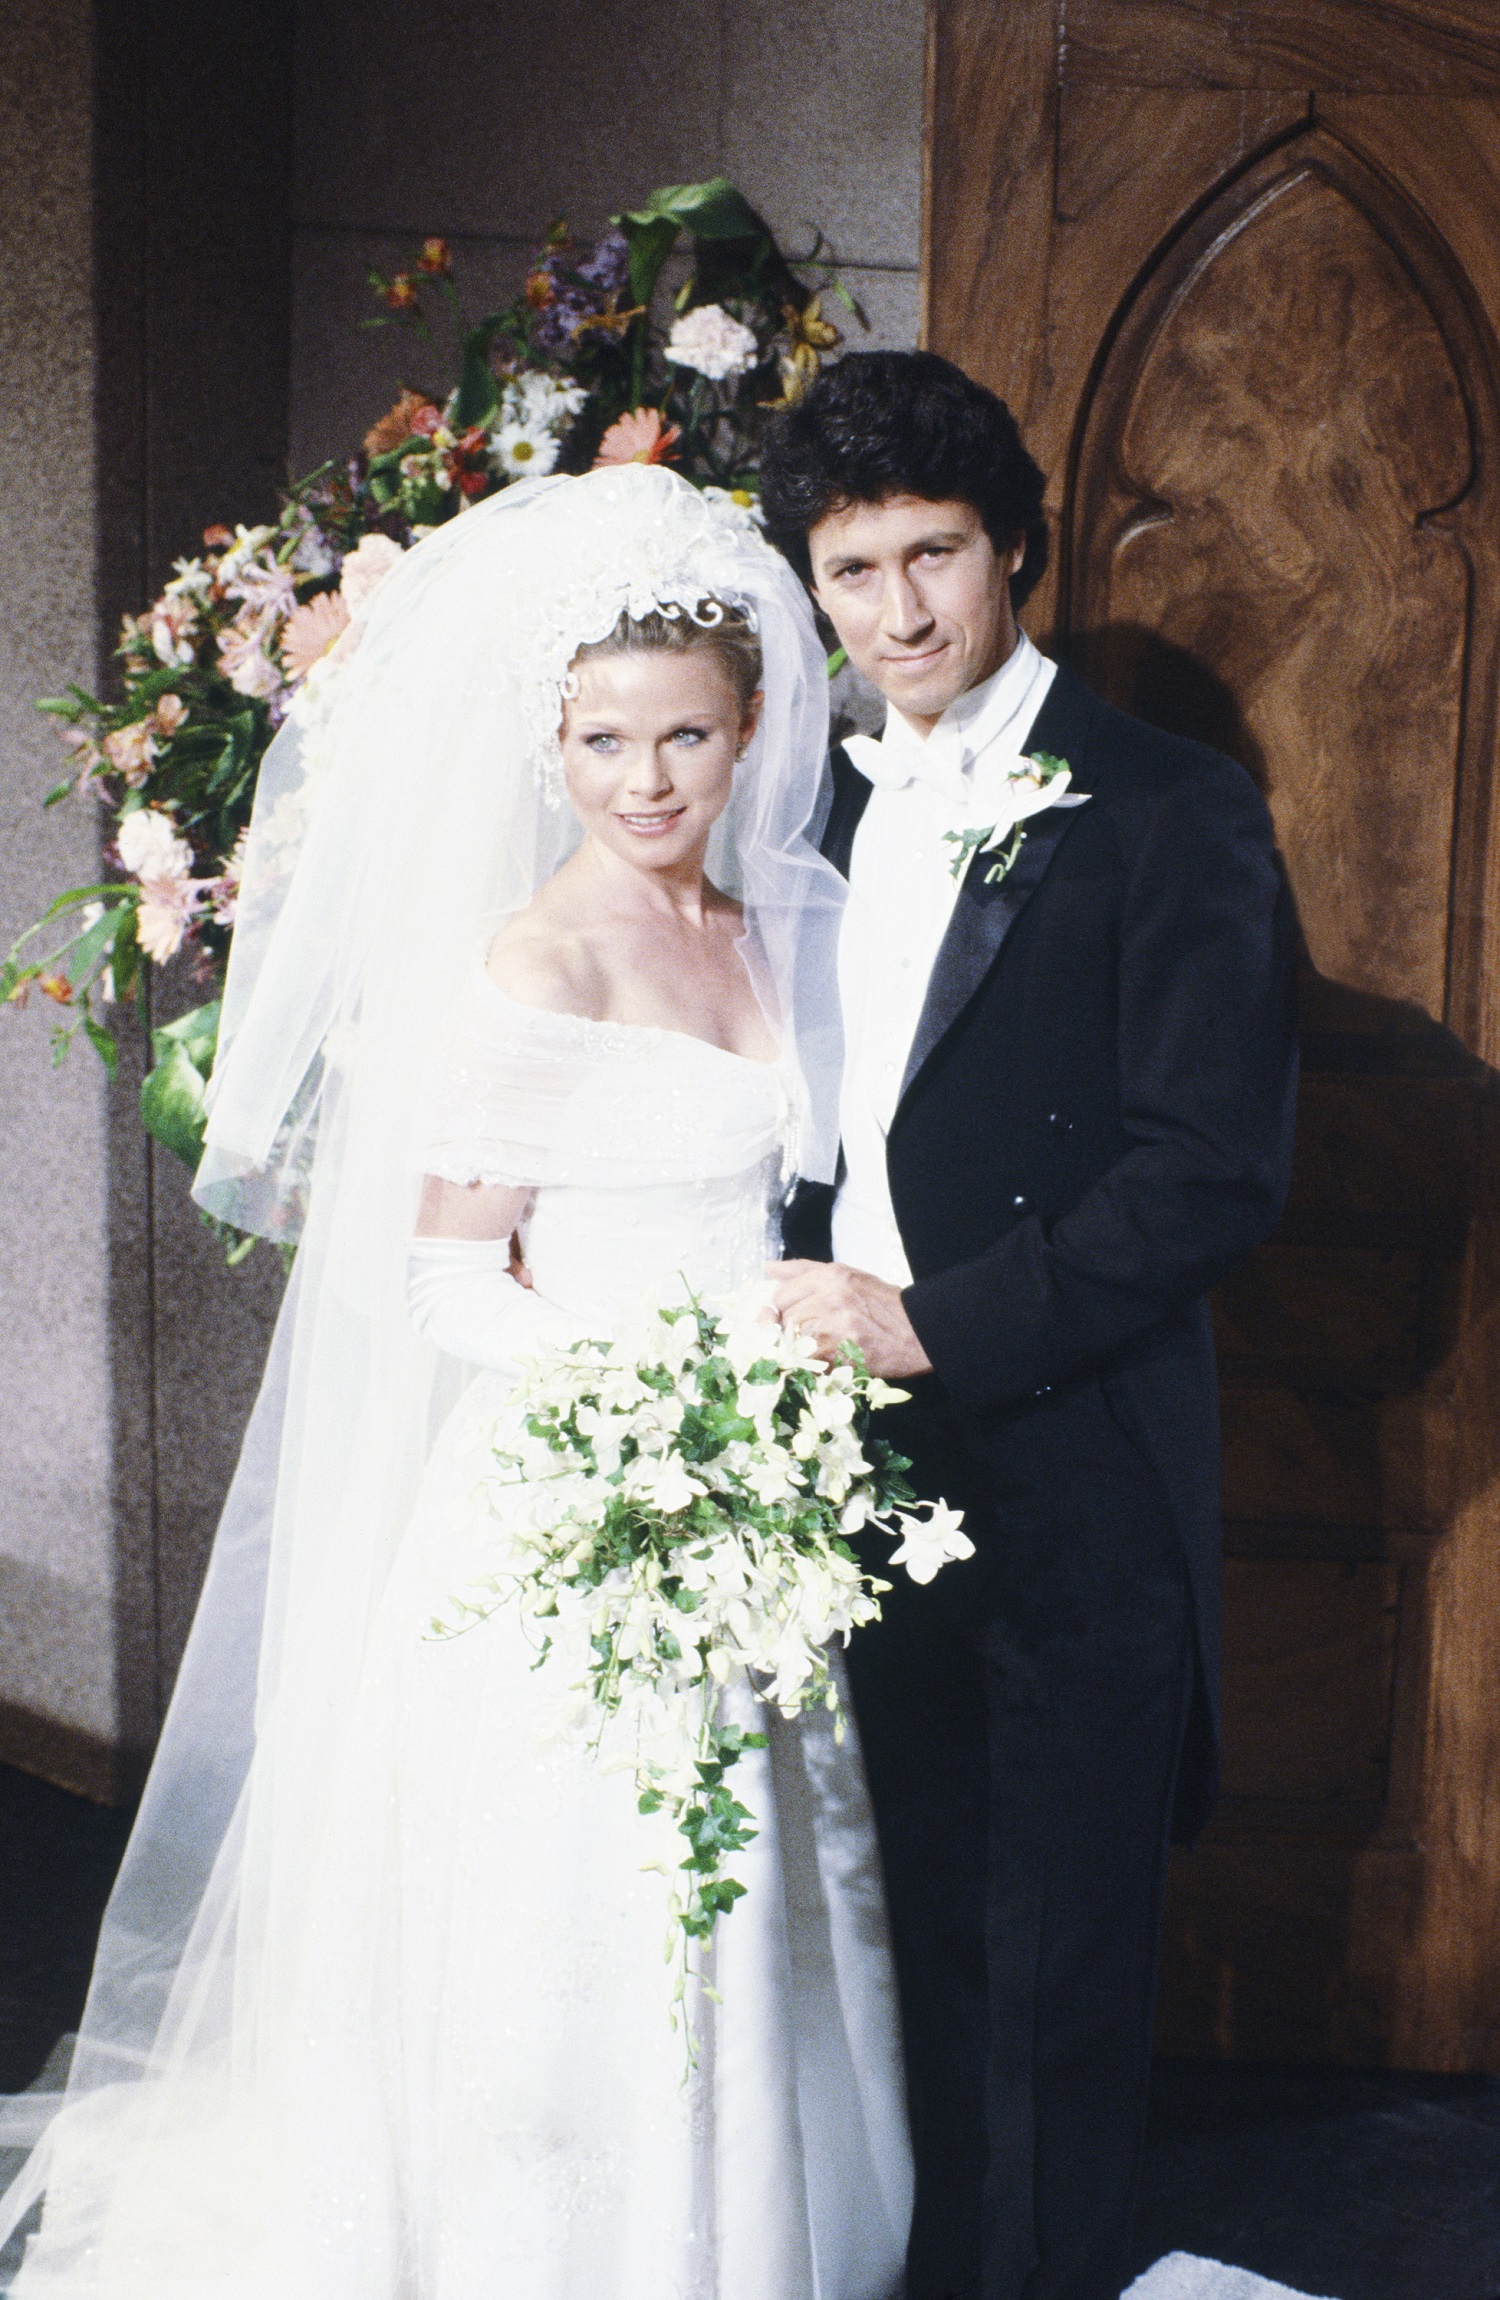 Days of Our Lives throwback photo featuring the Kimberly Brady and Shane Donovan wedding